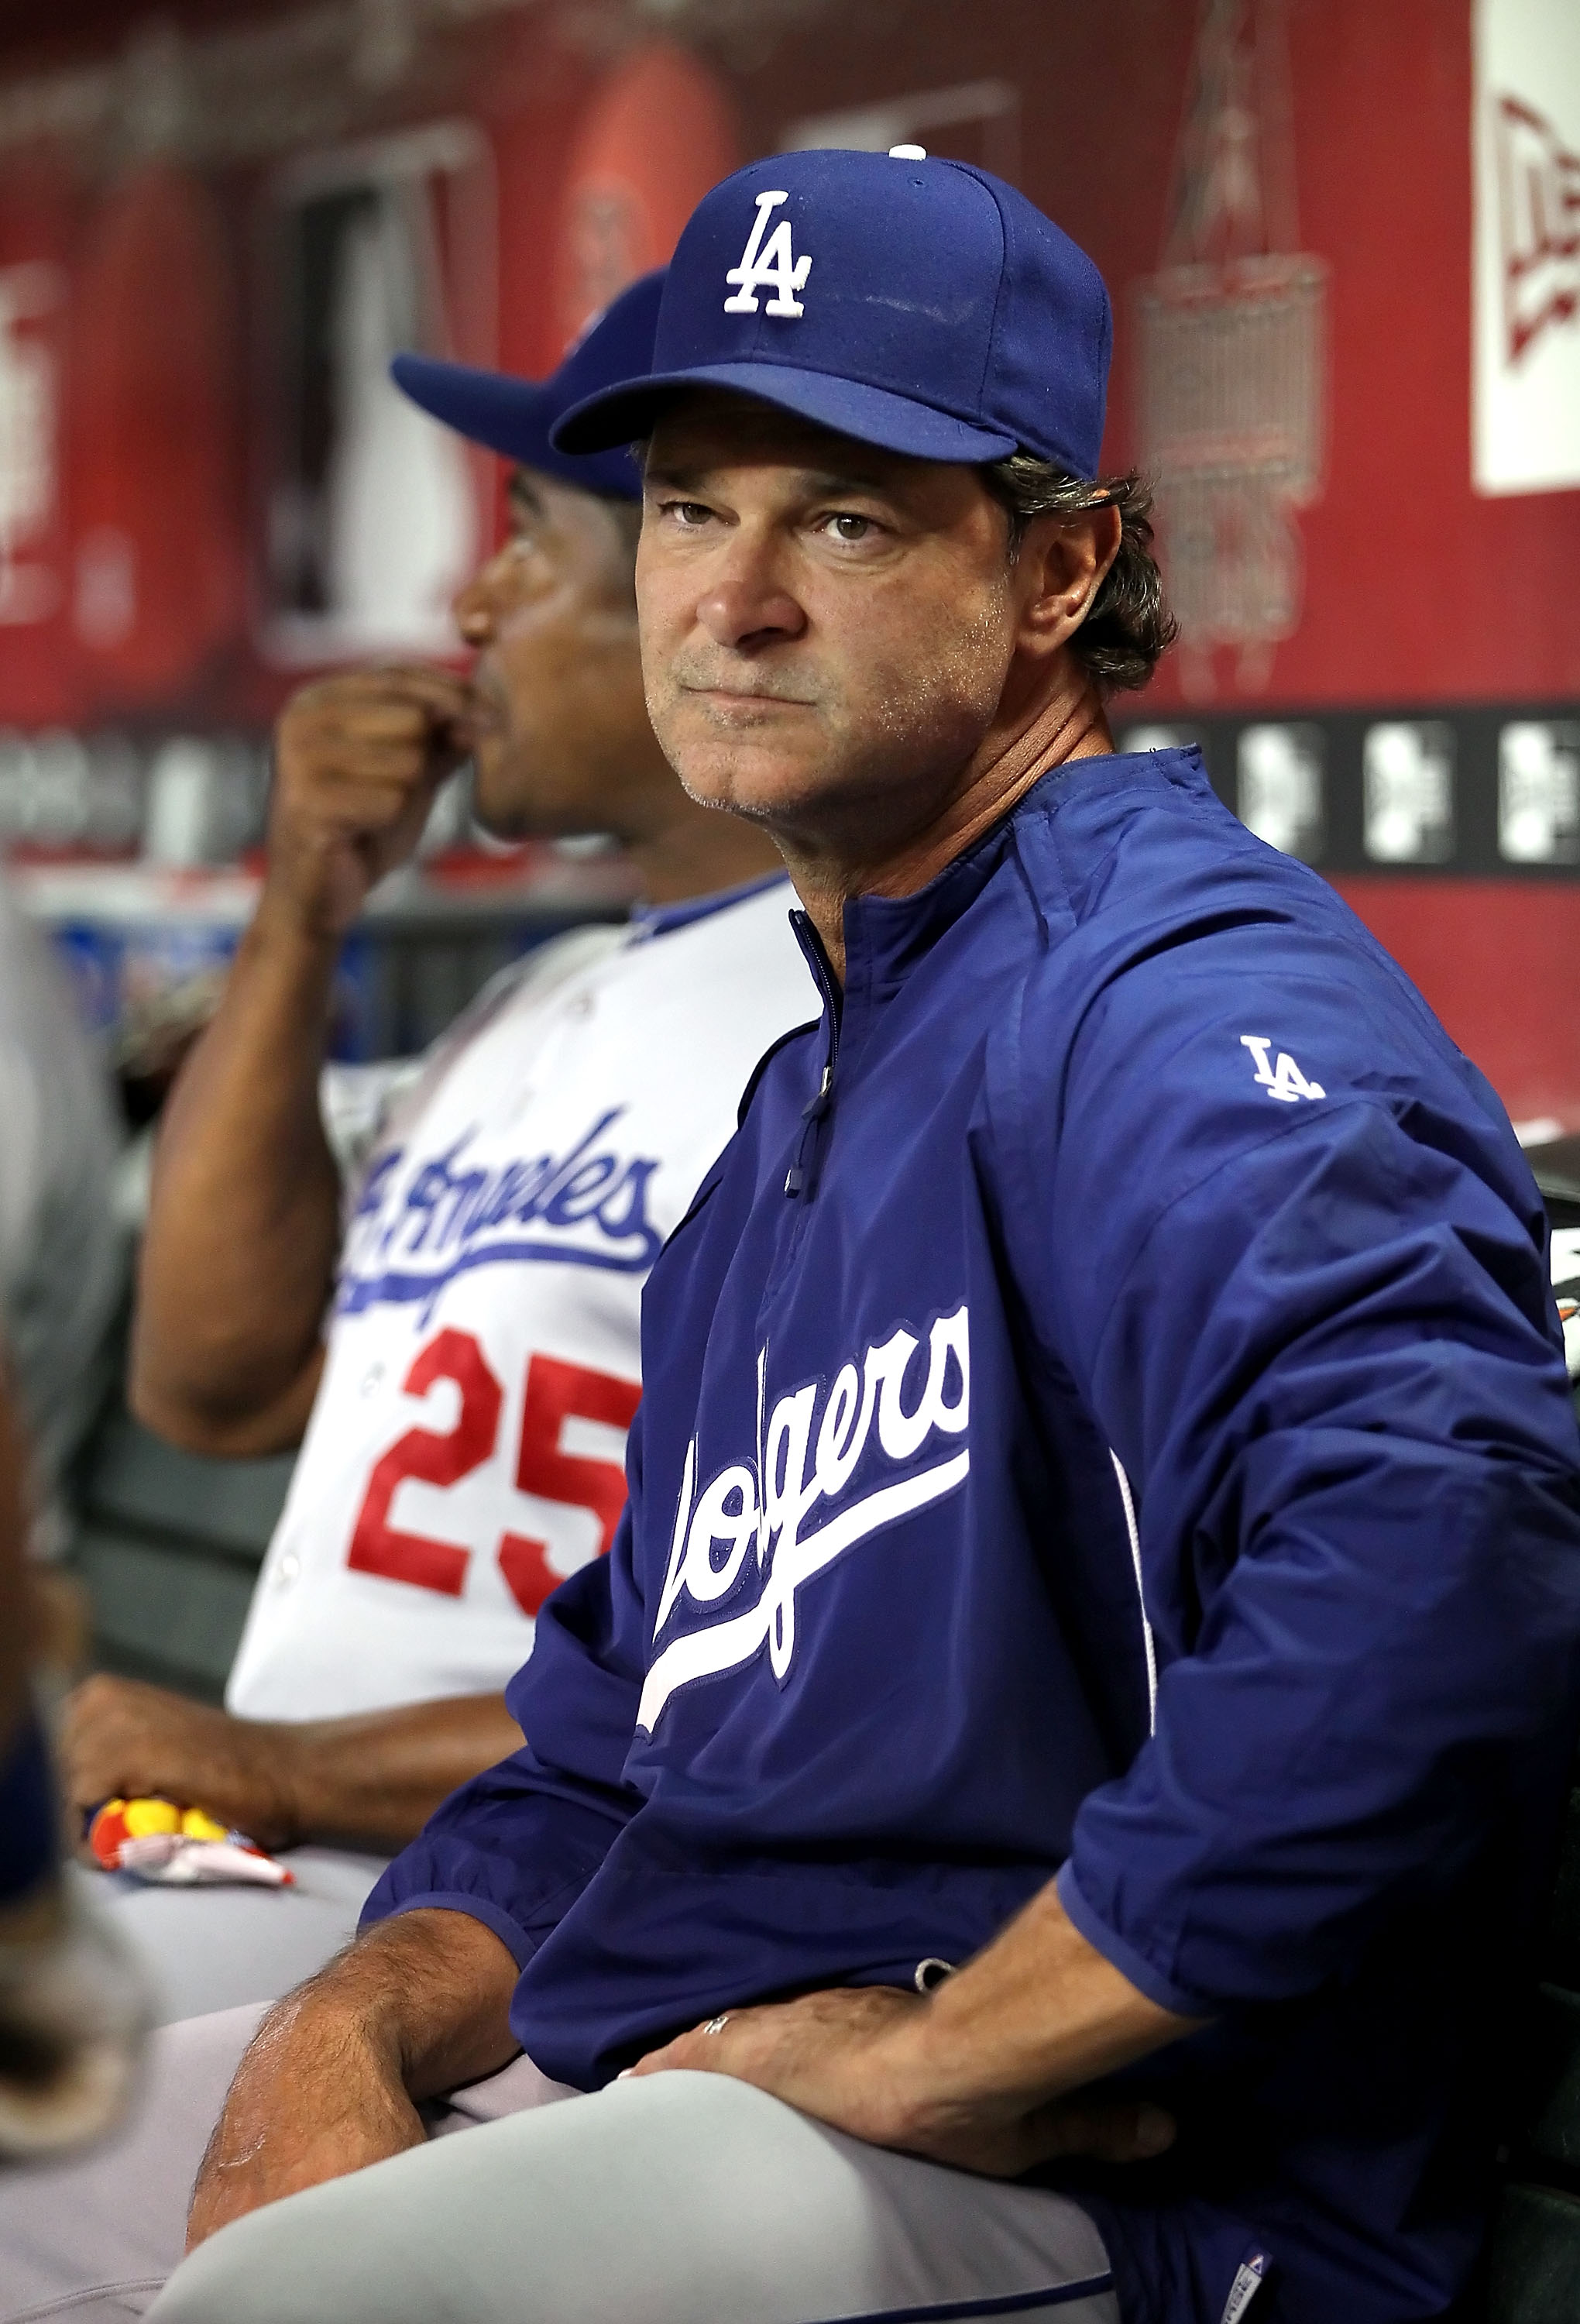 PHOENIX - SEPTEMBER 24:  Don Mattingly of the Los Angeles Dodgers sits in the dugout during the Major League Baseball game against the Arizona Diamondbacks at Chase Field on September 24, 2010 in Phoenix, Arizona.   The Dodgers defeated the Diamondbacks 3